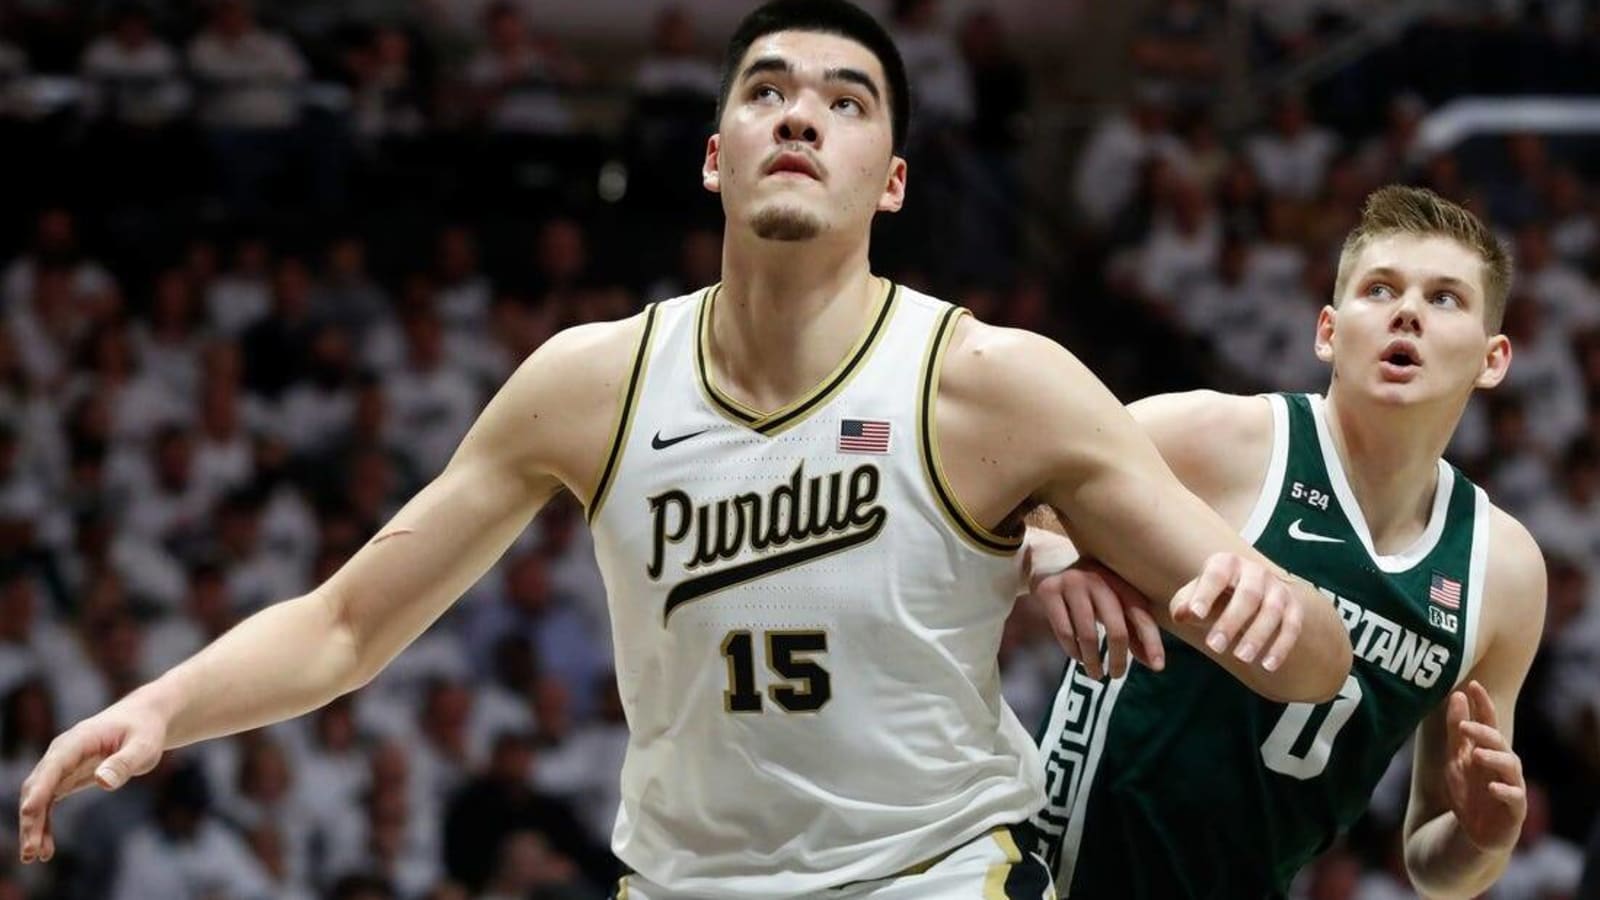 Penn State vs. No. 1 Purdue preview, prediction, pick for 2/1: Can Boilermakers stay at the top?